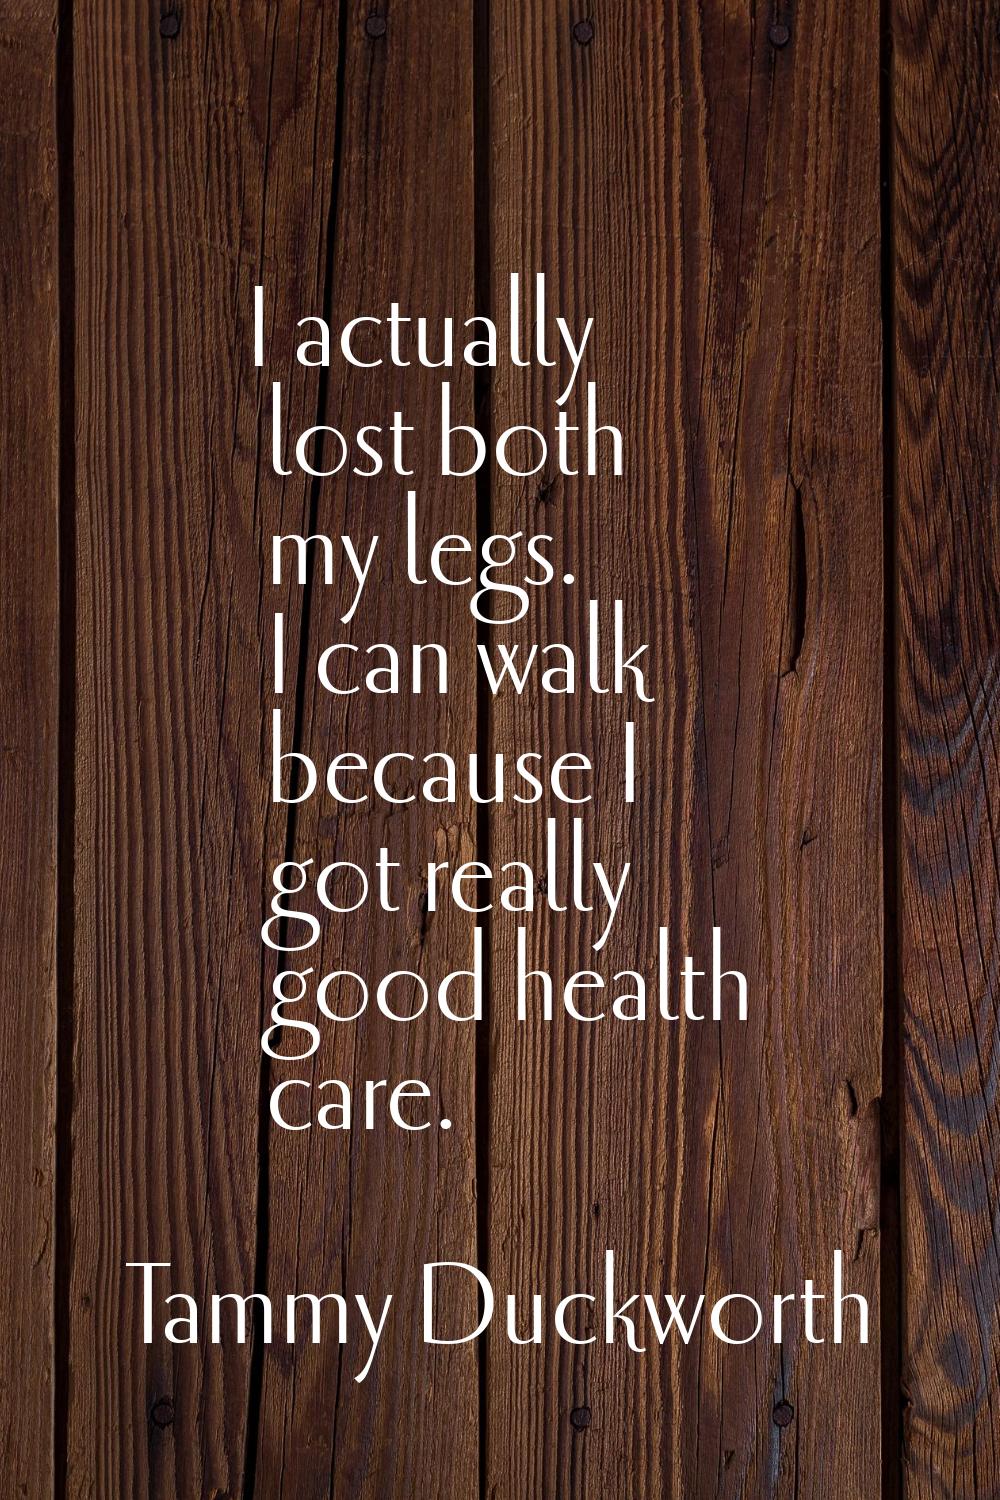 I actually lost both my legs. I can walk because I got really good health care.